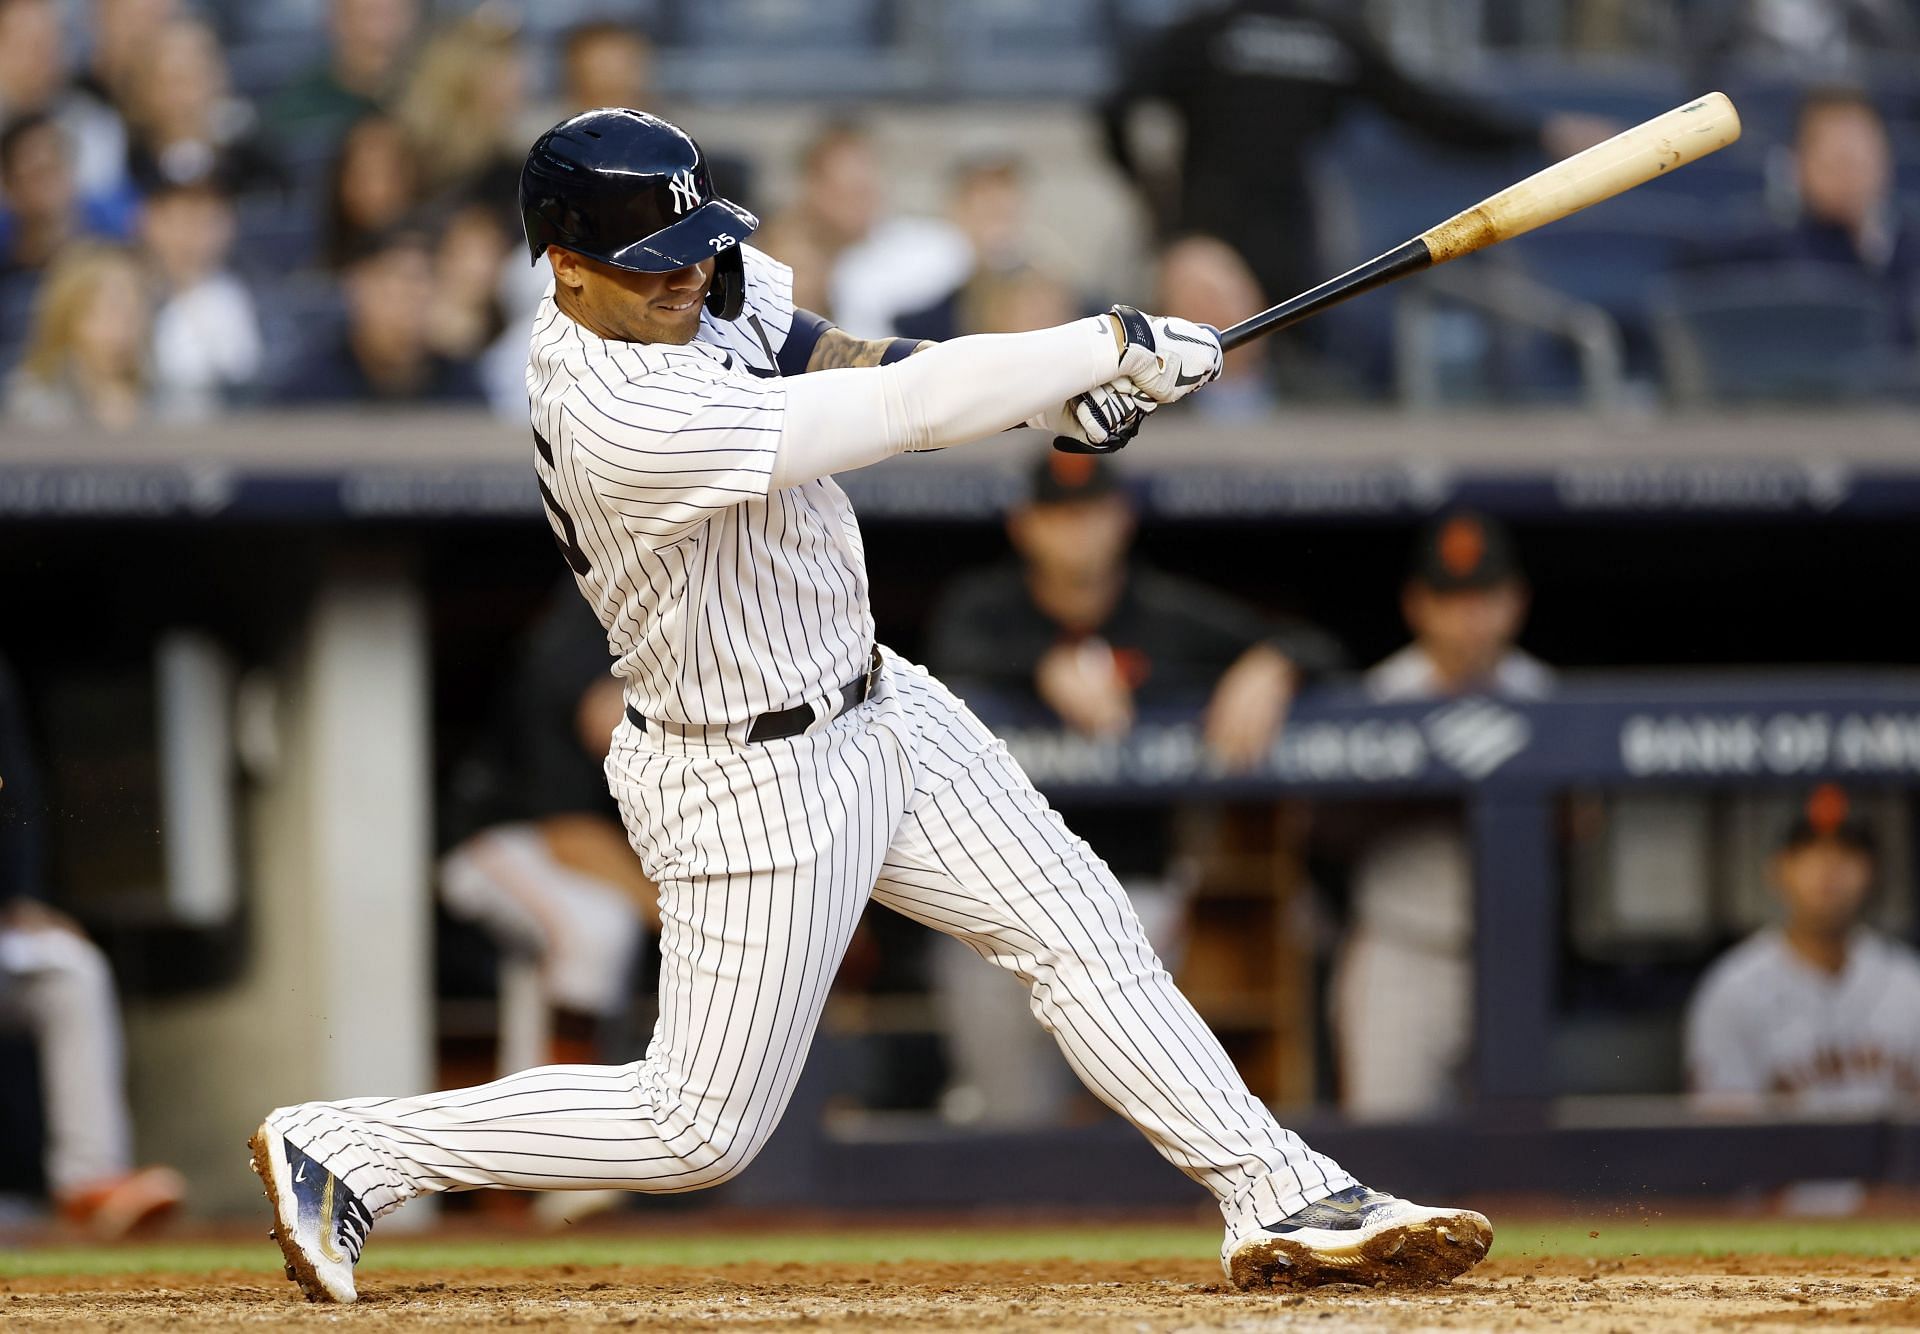 Gleyber Torres at bat during the eighth inning against the San Francisco Giants at Yankee Stadium